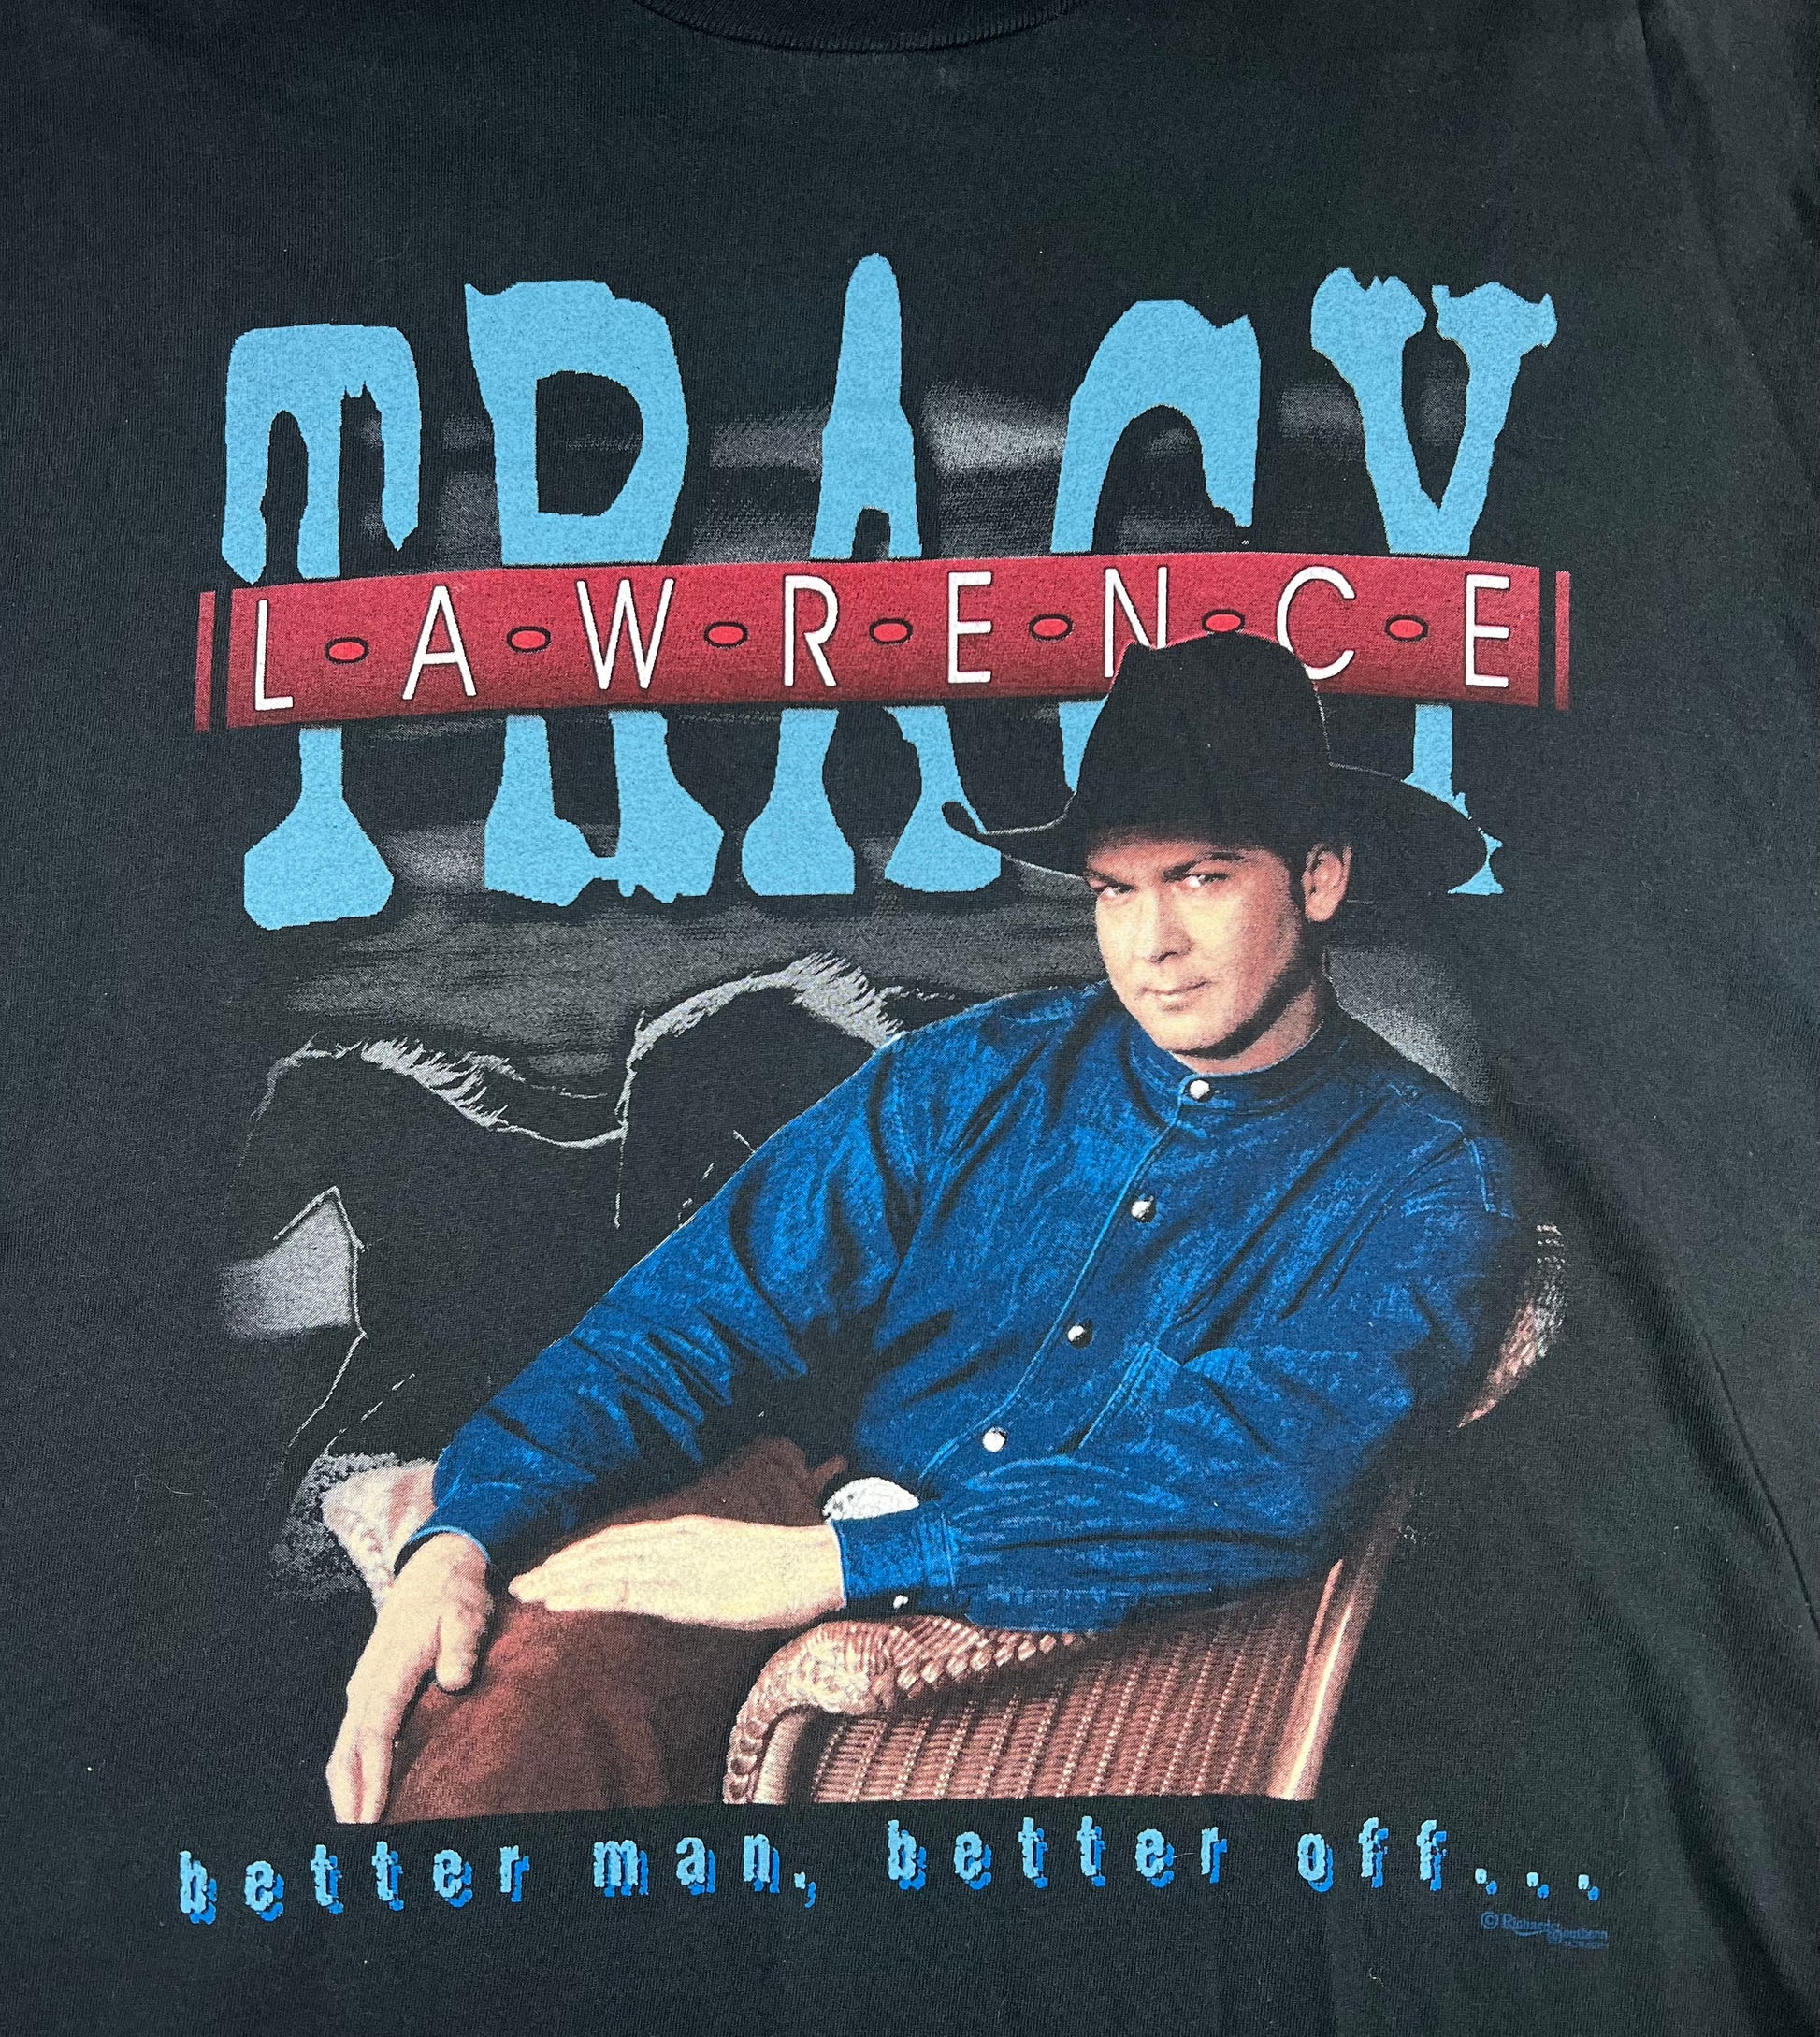 '97 Tracy Lawrence Concert Tee (XL)